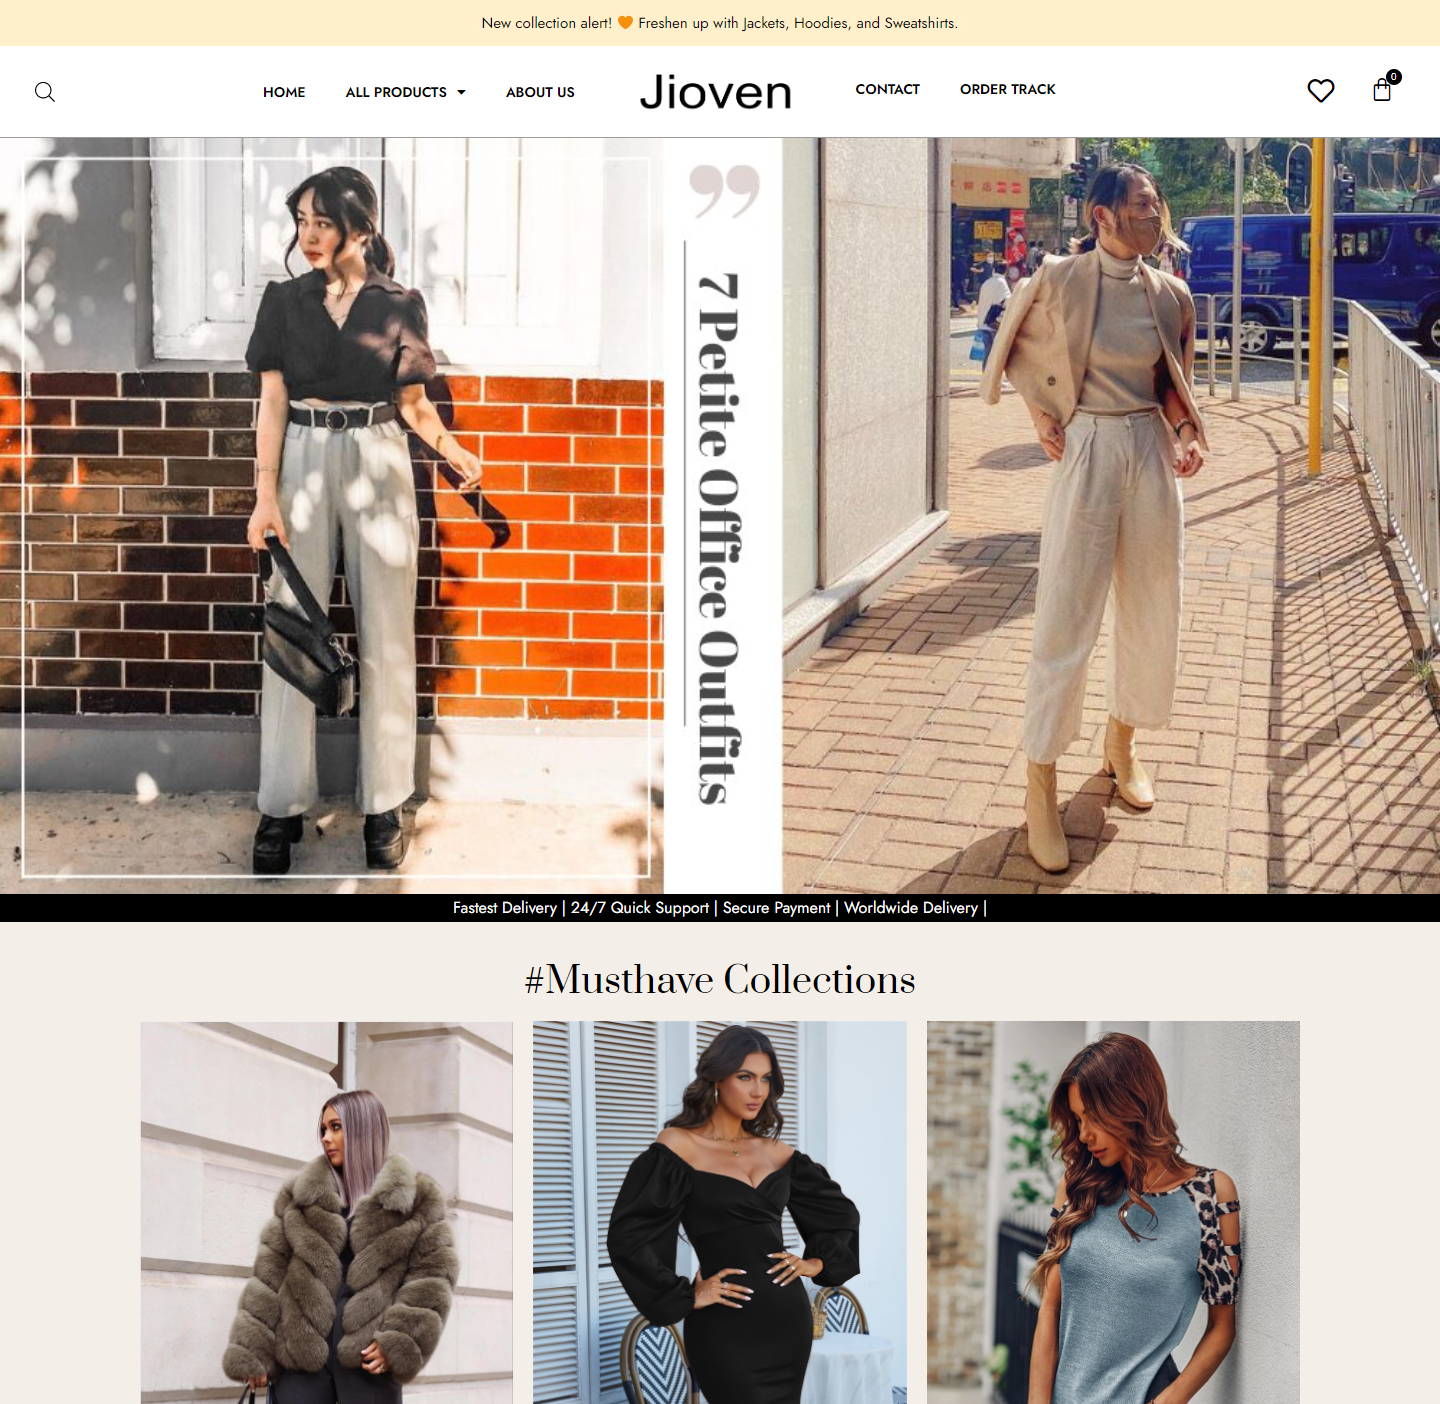 Jioven is another example of a successful web design project